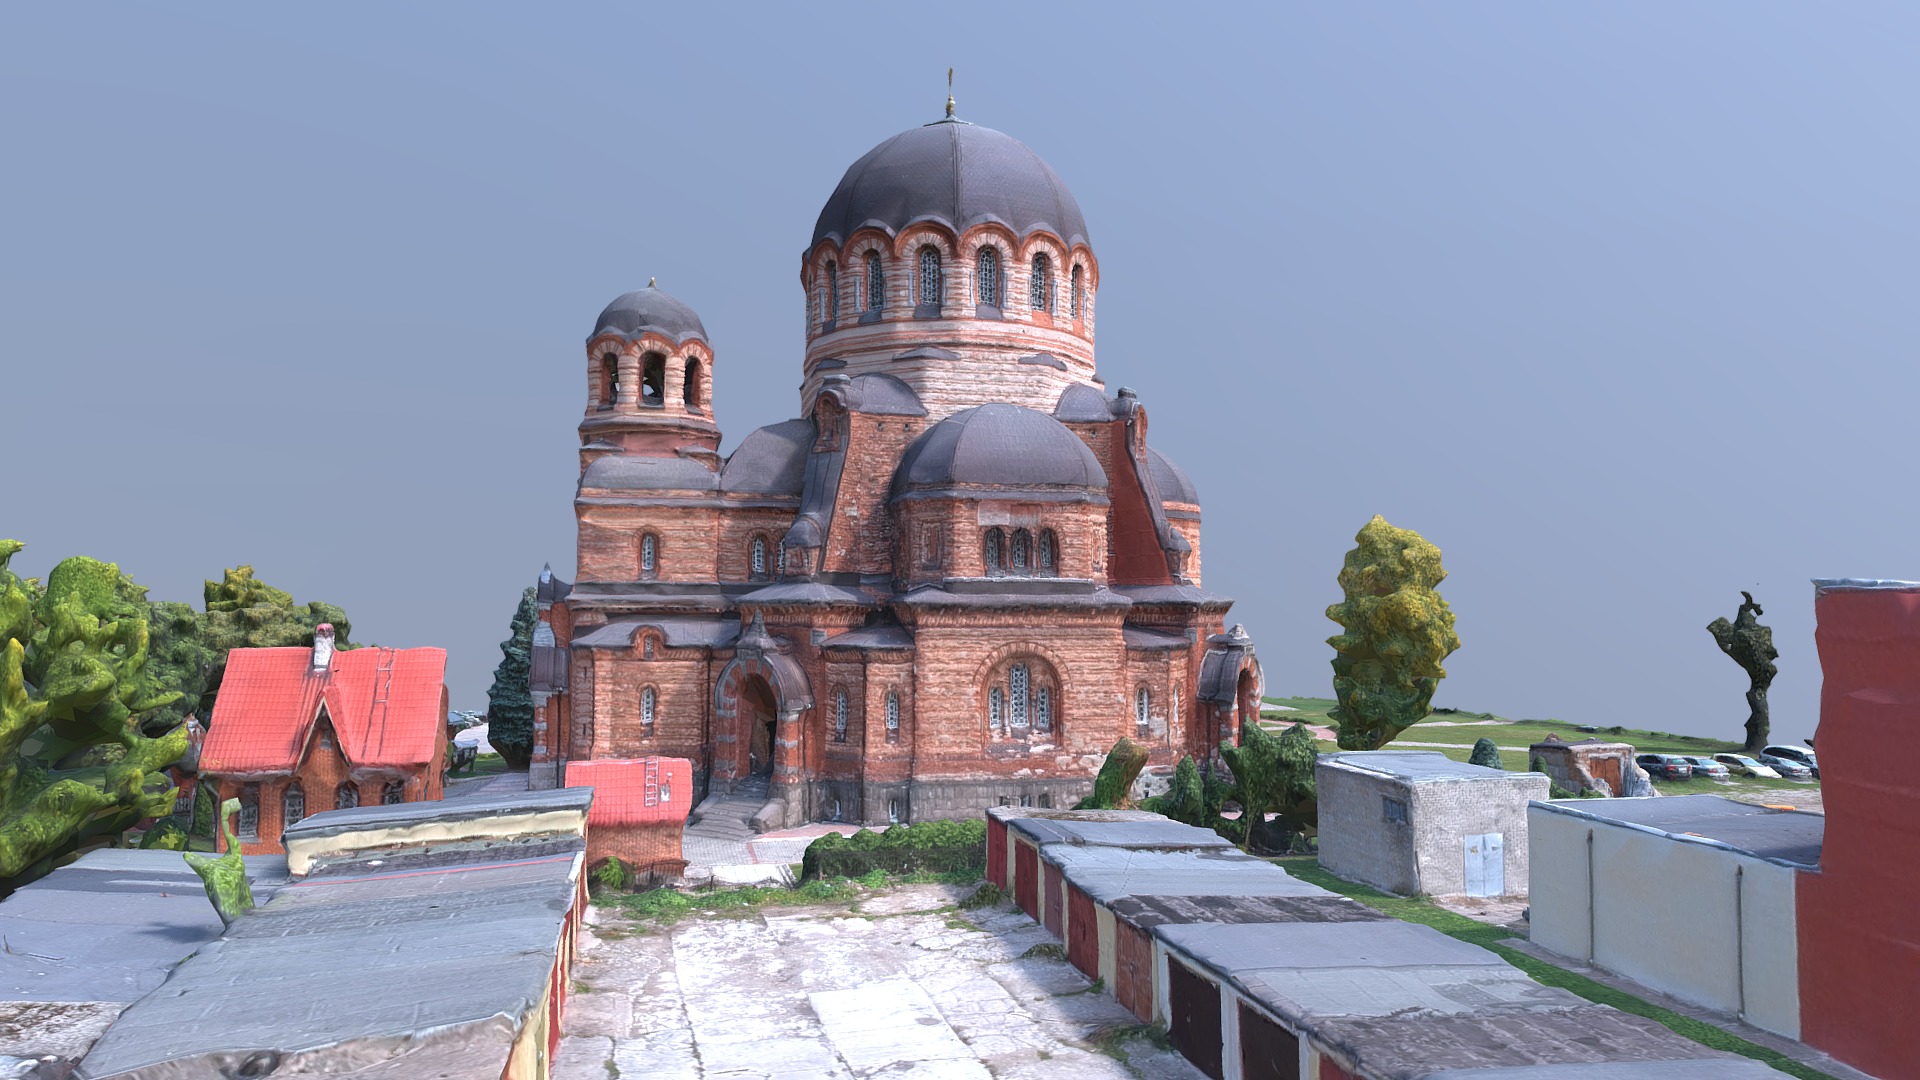 3D model Russian Church - This is a 3D model of the Russian Church. The 3D model is about a large brick building with a domed roof.